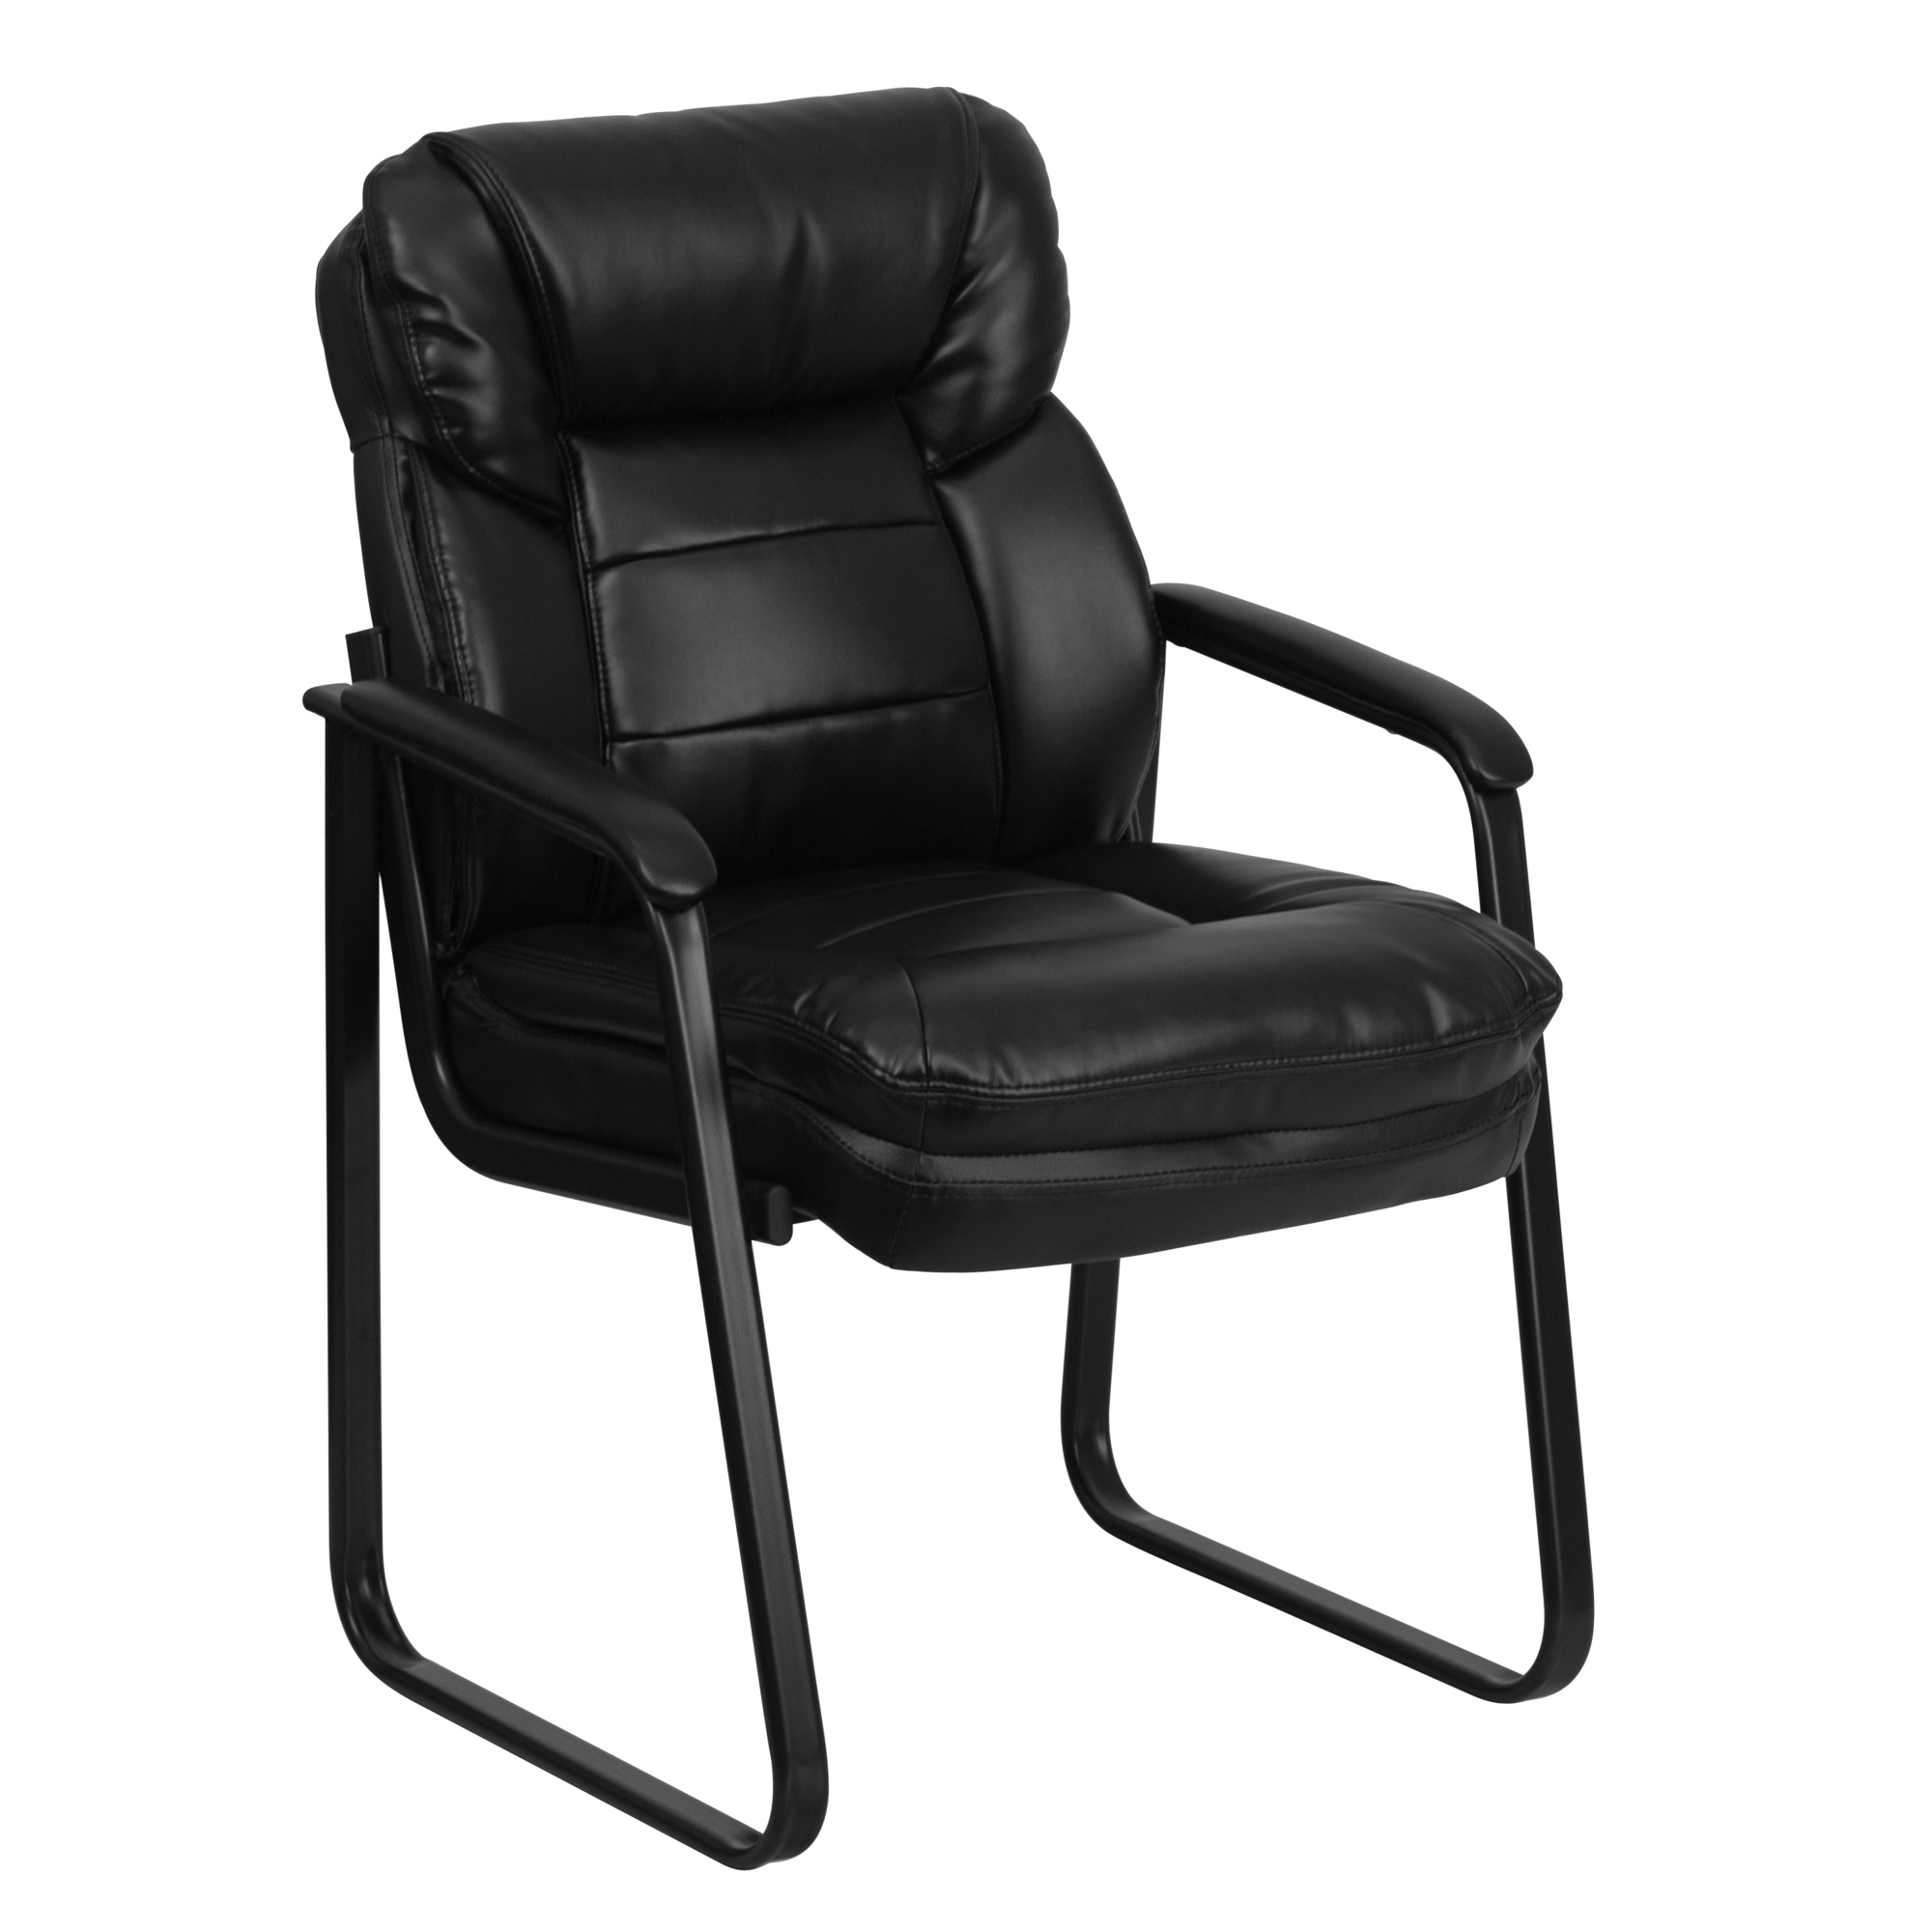 Flash Furniture, Black LeatherSoft Chair with Lumbar Support, Primary Color Black, Included (qty.) 1, Model GO1156BKLEA